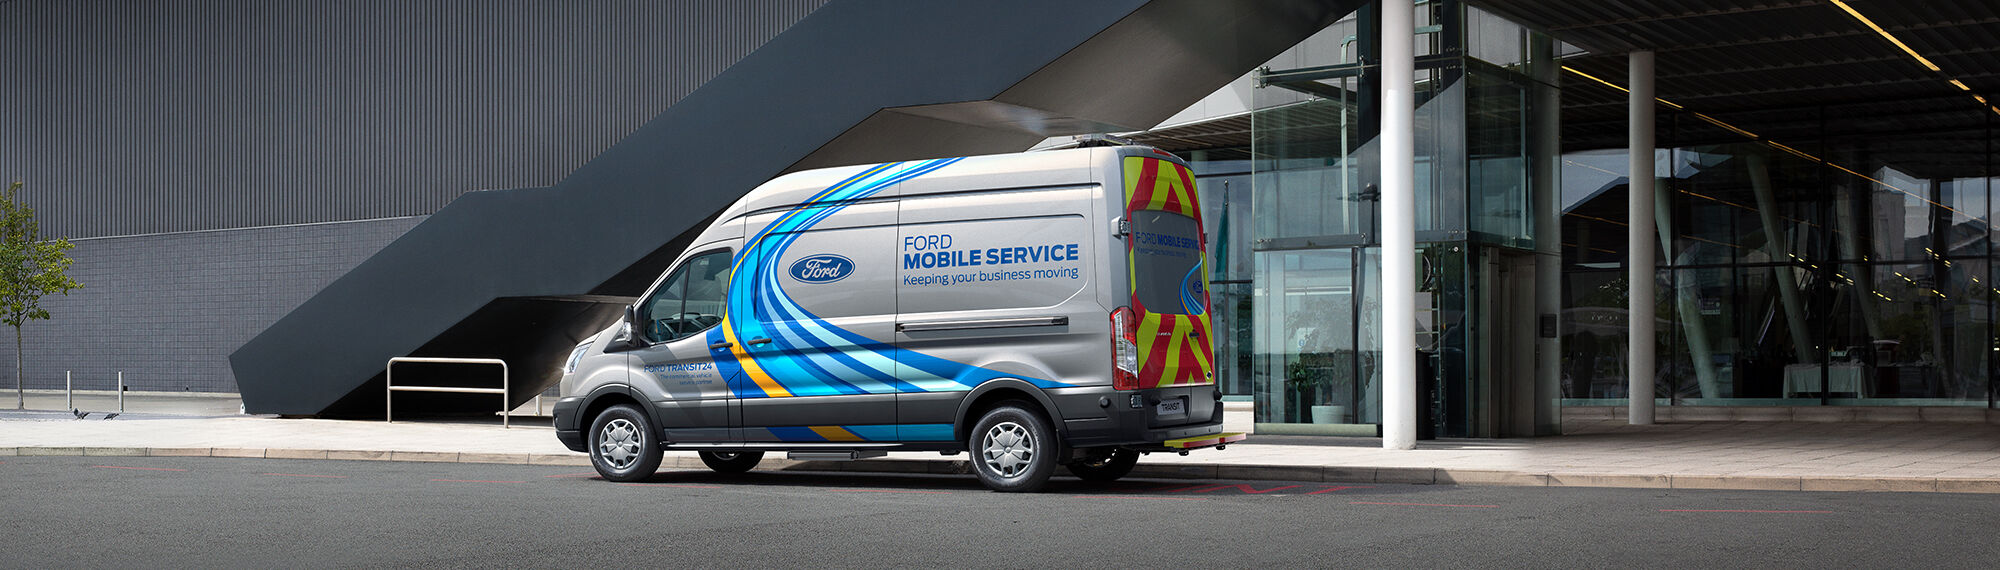 Ford Mobile Servicing Image